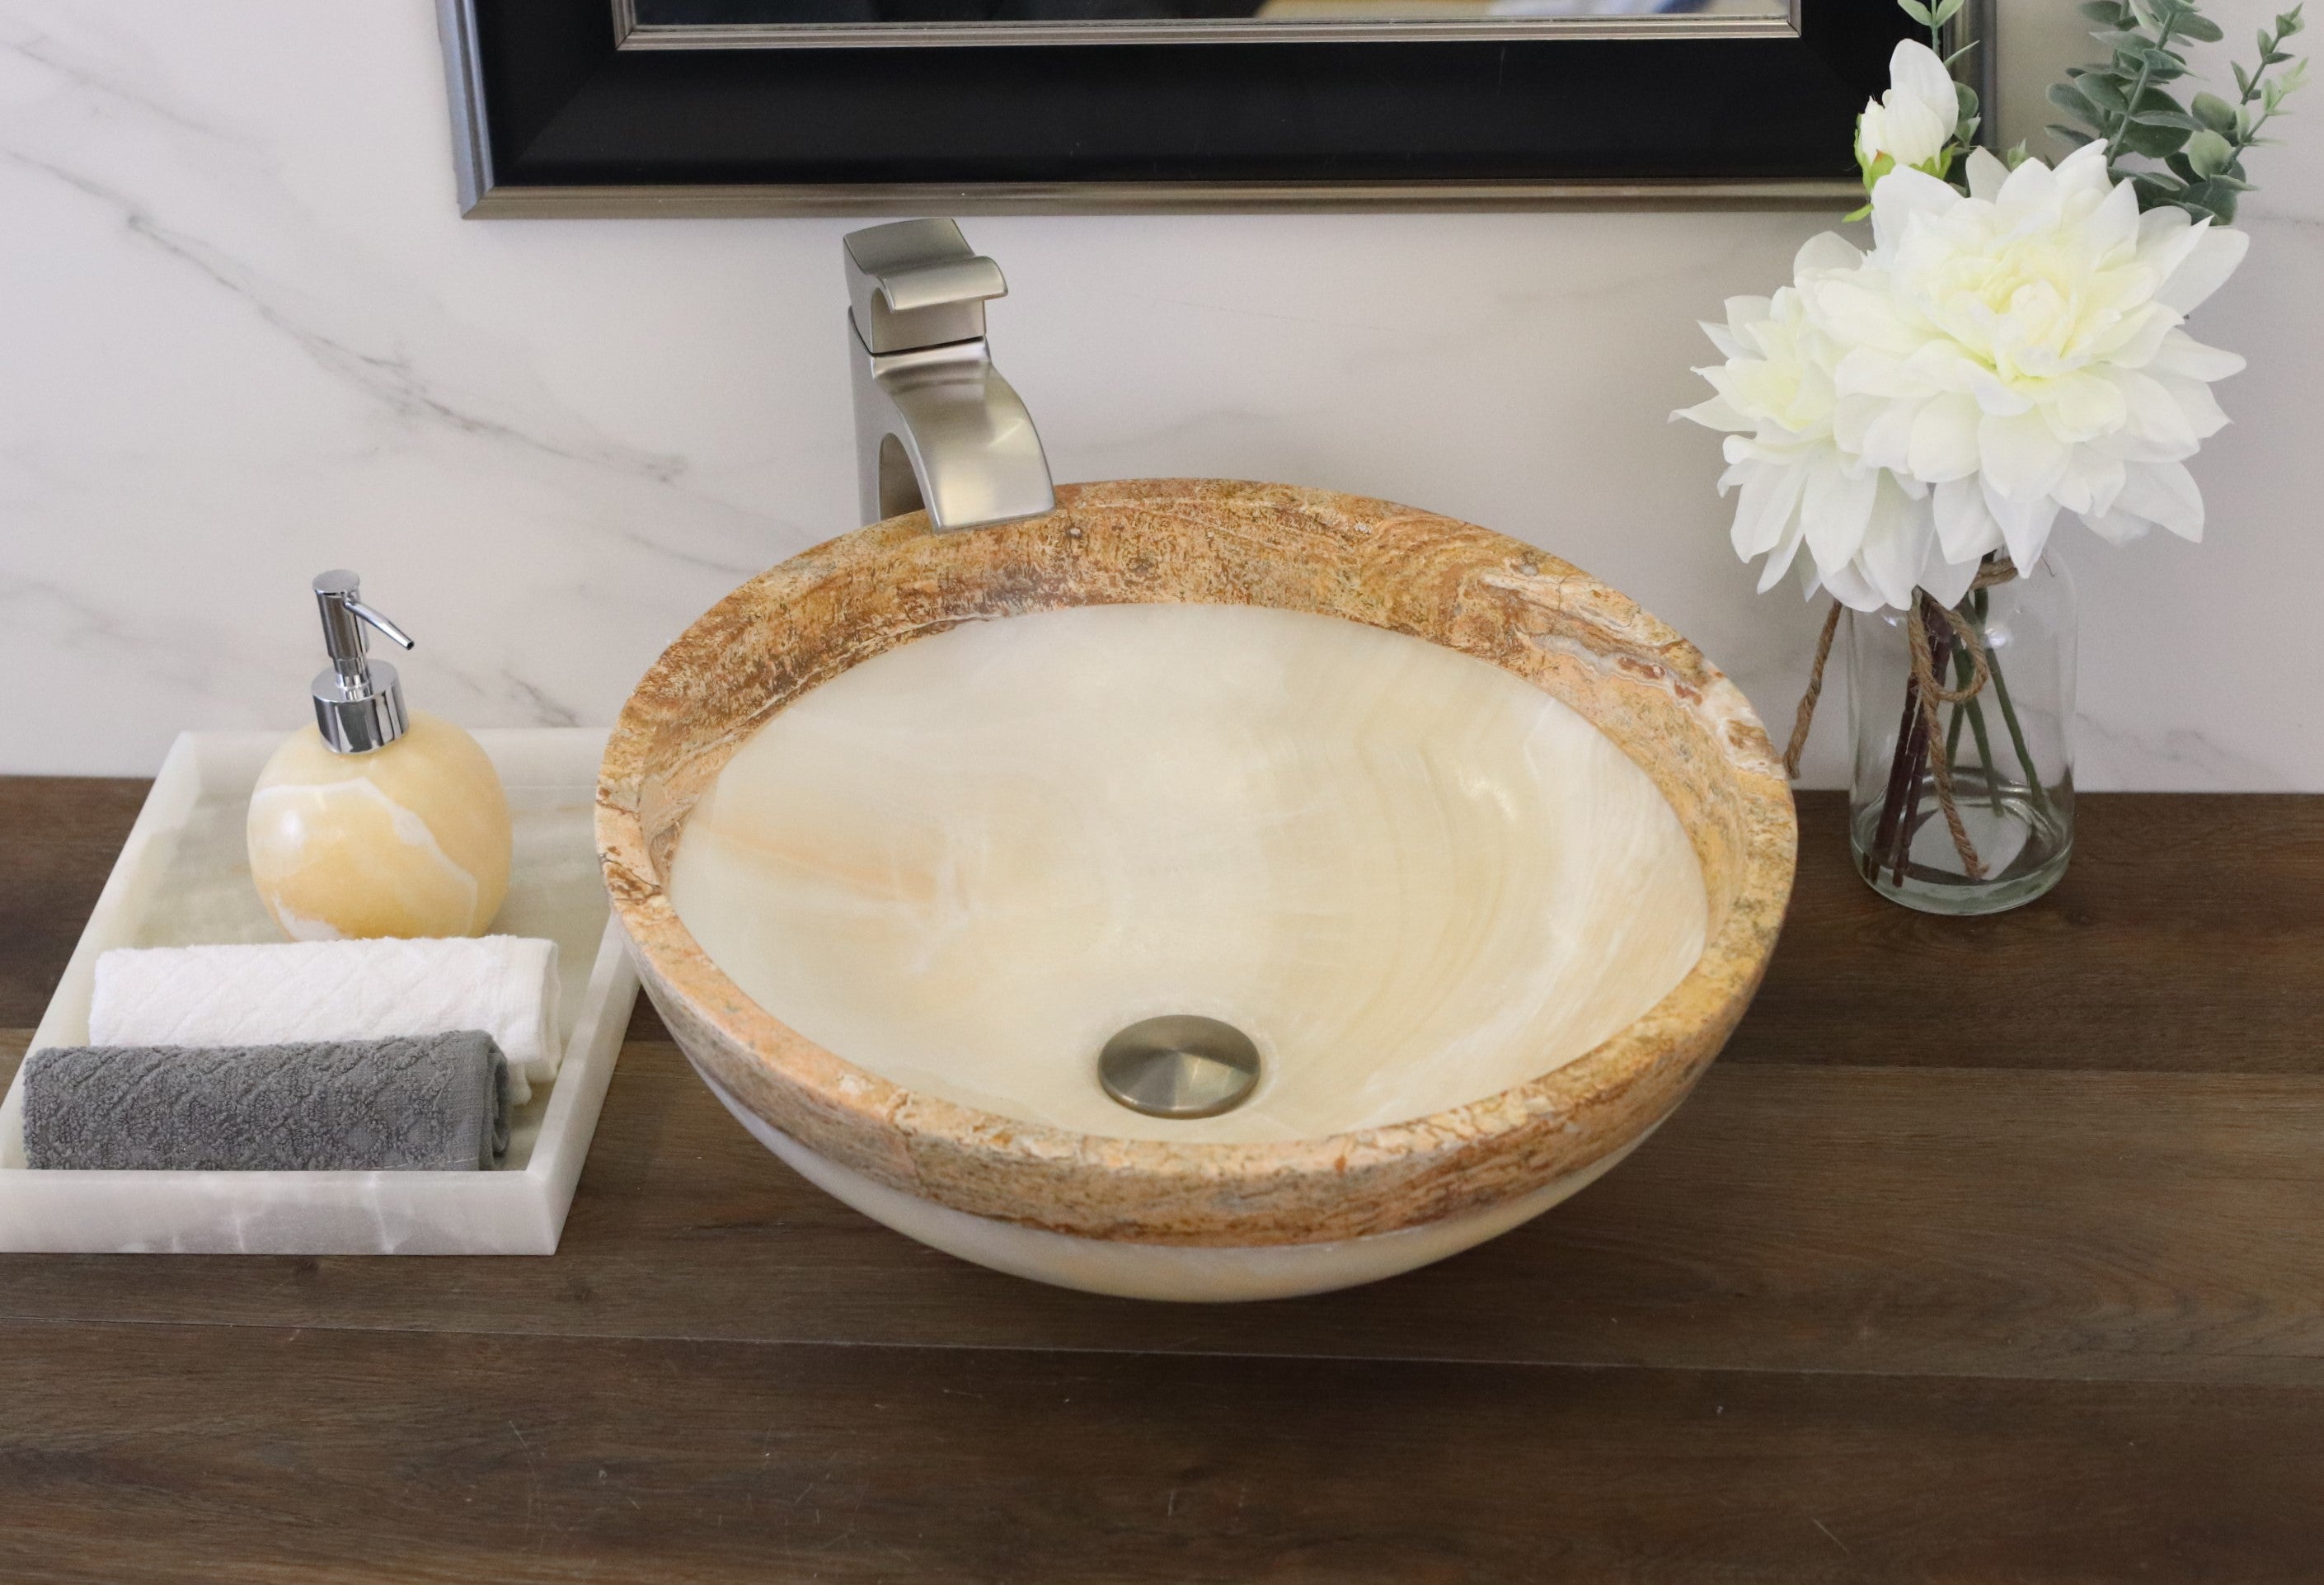 White Round Onyx and Travertine Stone Vessel Above Counter Bathroom Sink. Handmade in Mexico. Hand finished and ships from the USA. Buy now at www.felipeandgrace.com. 